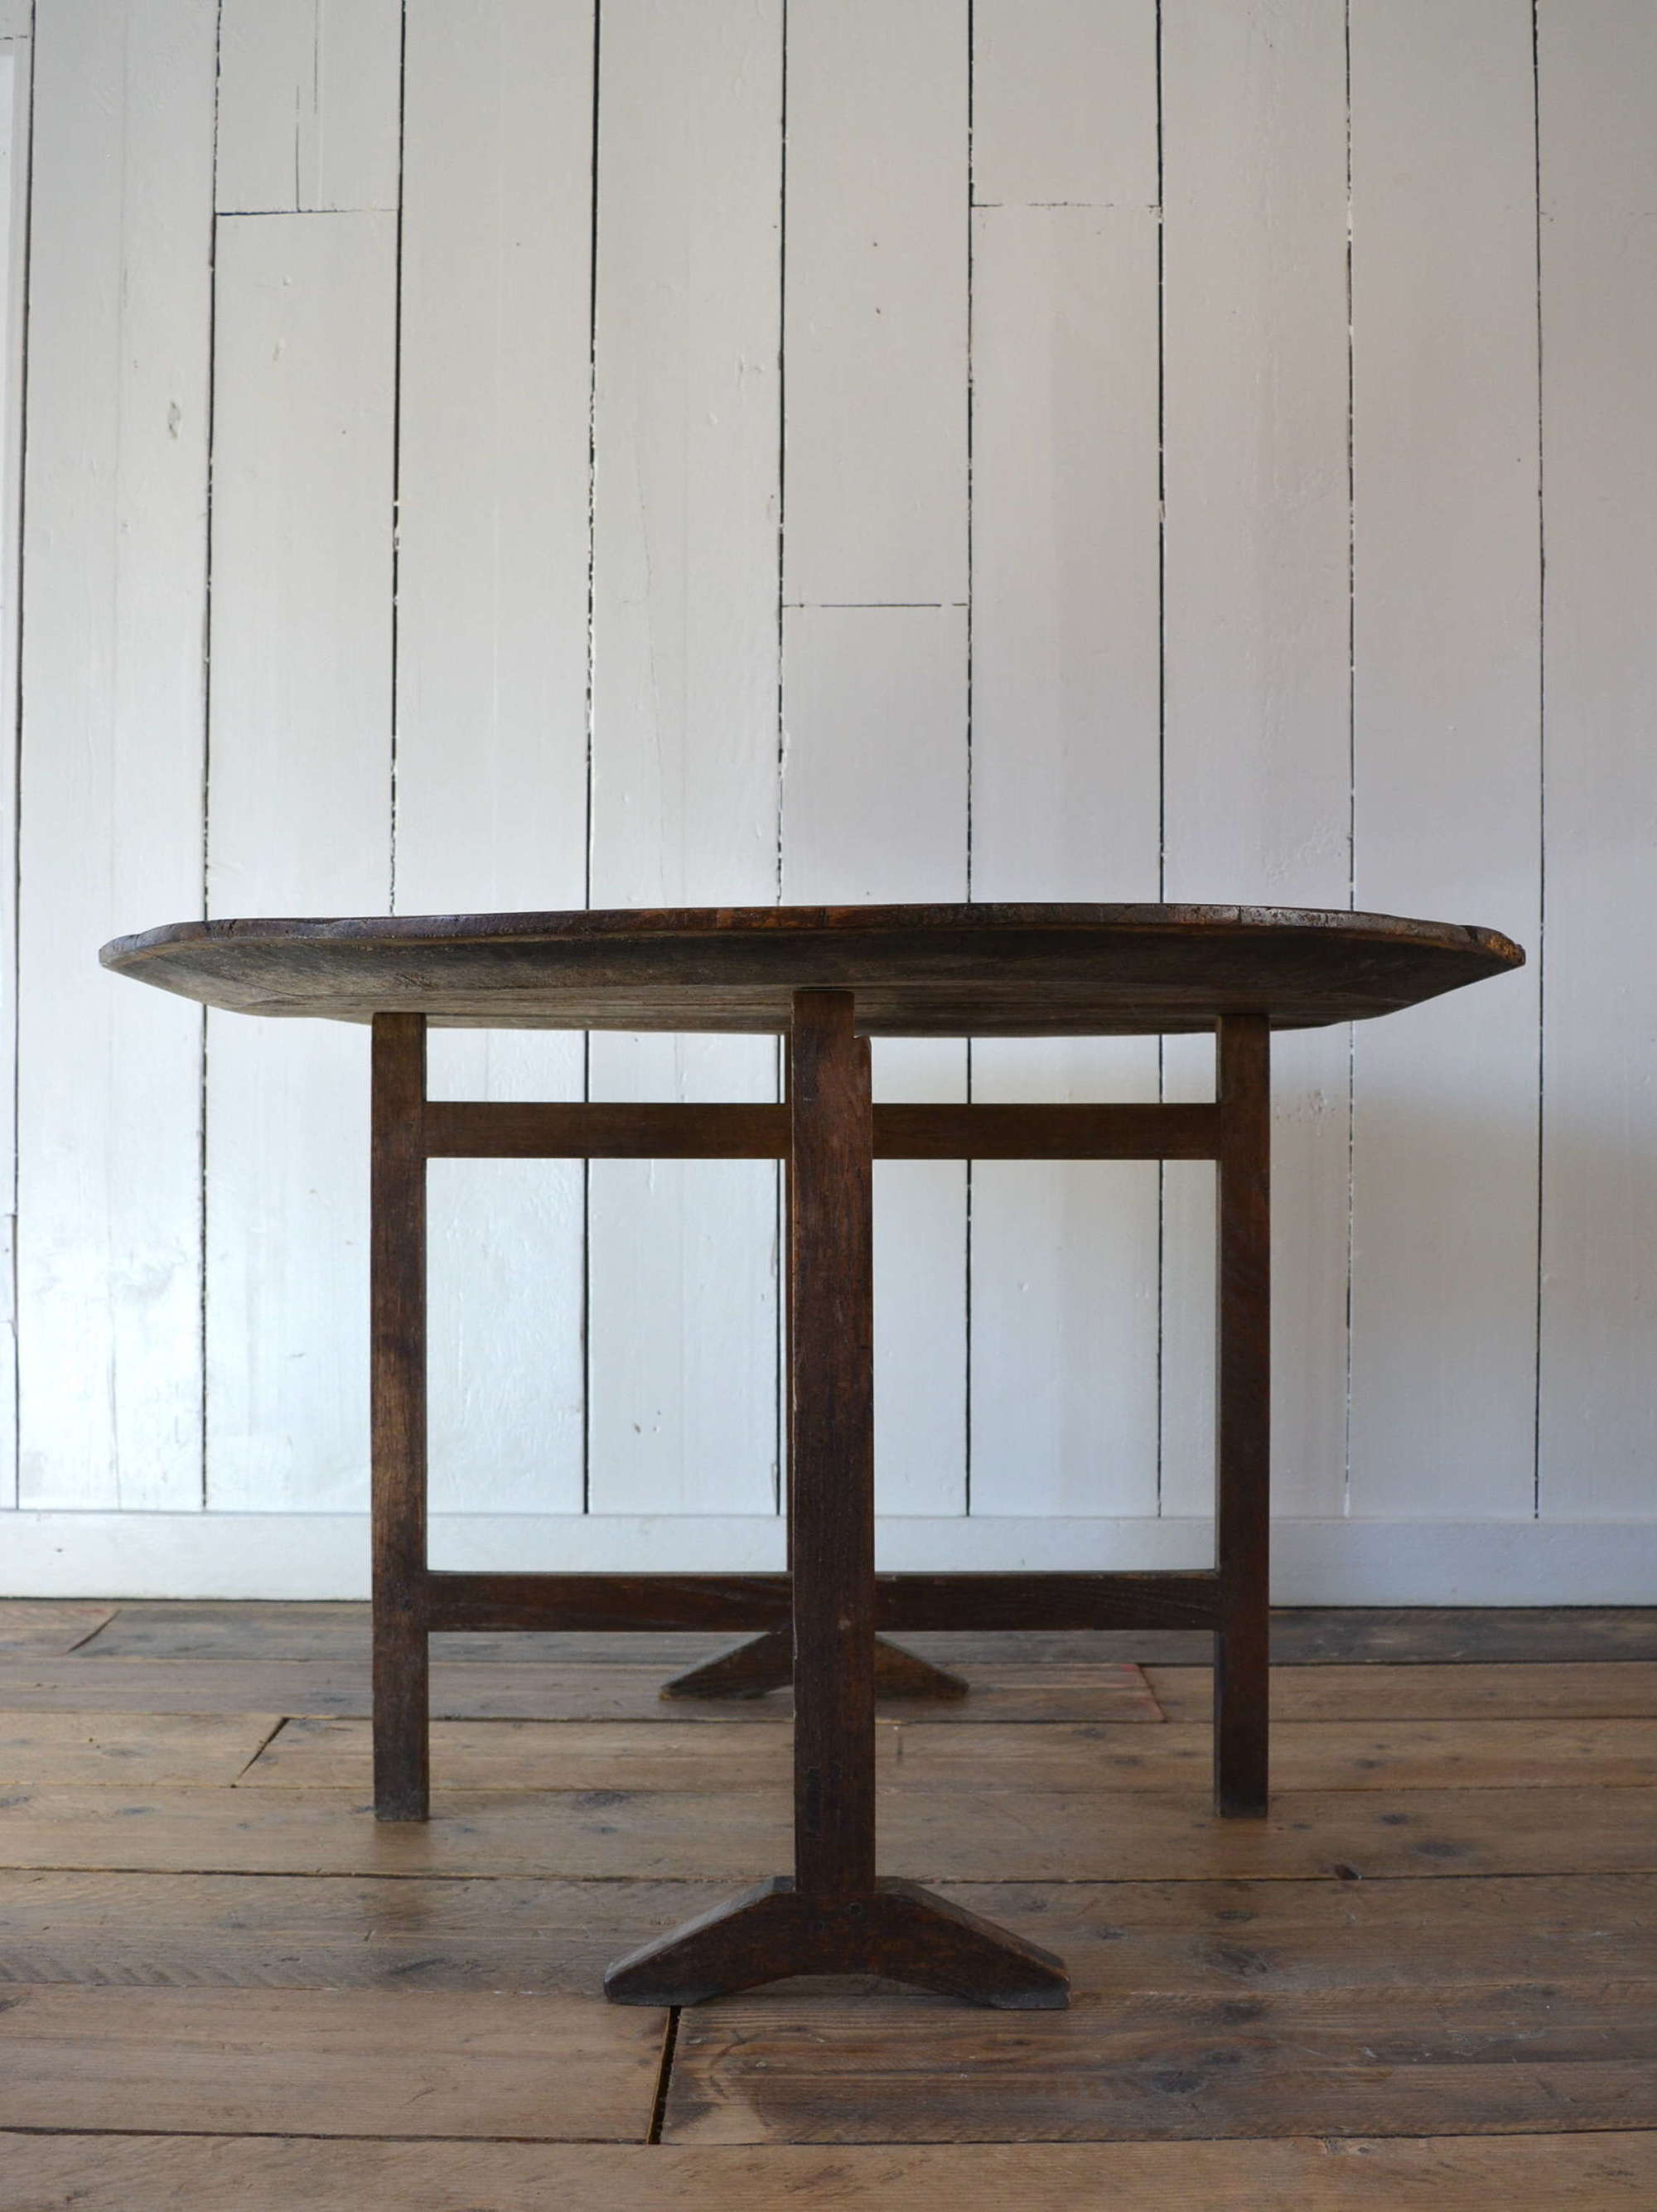 EARLY 19TH CENTURY VENDAGE TABLE